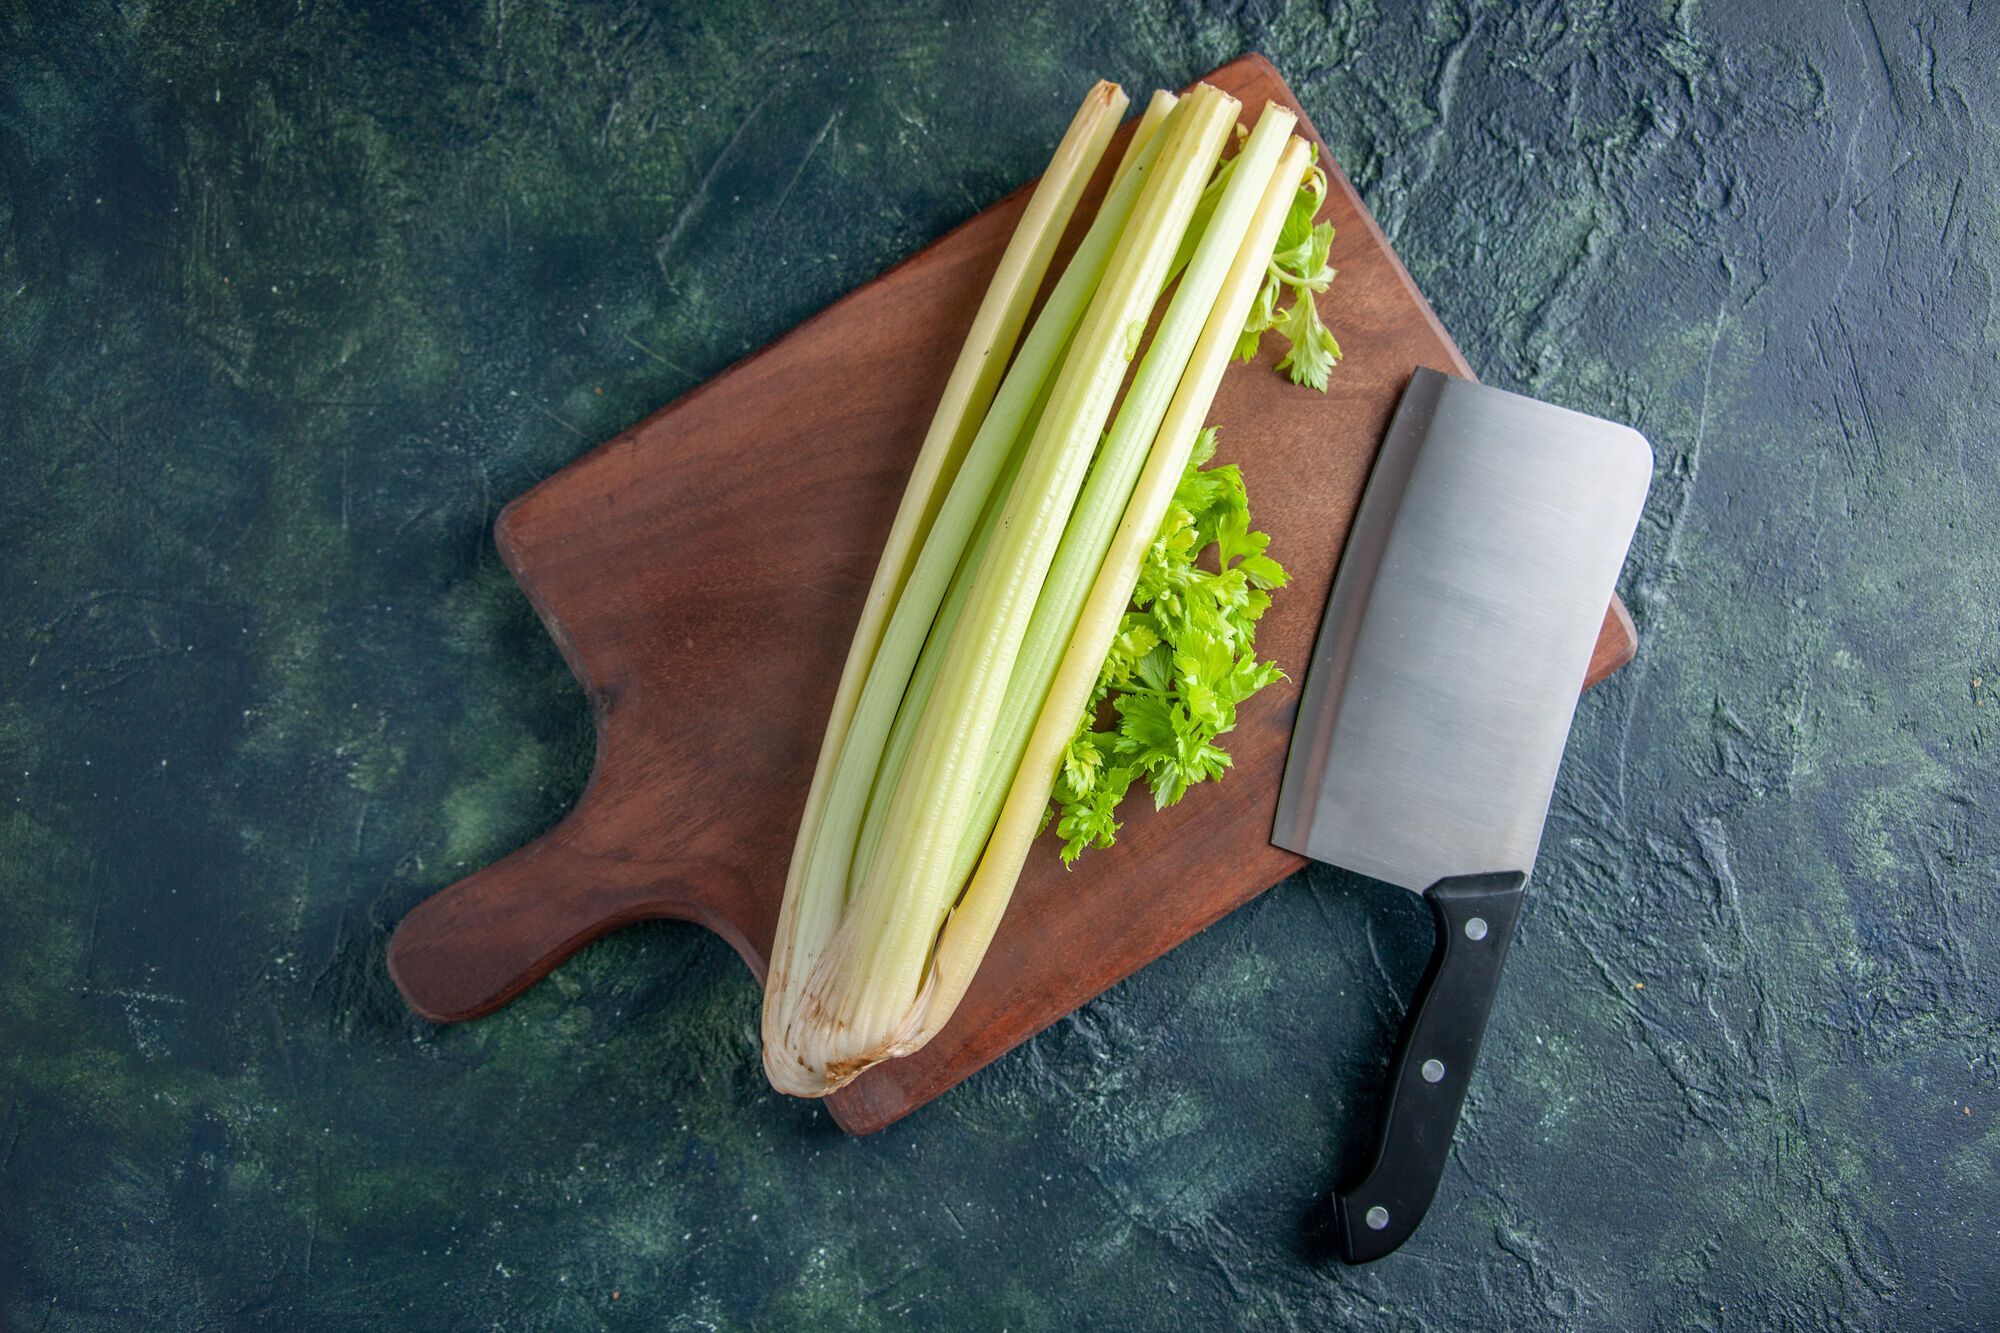 Cut the celery into small pieces